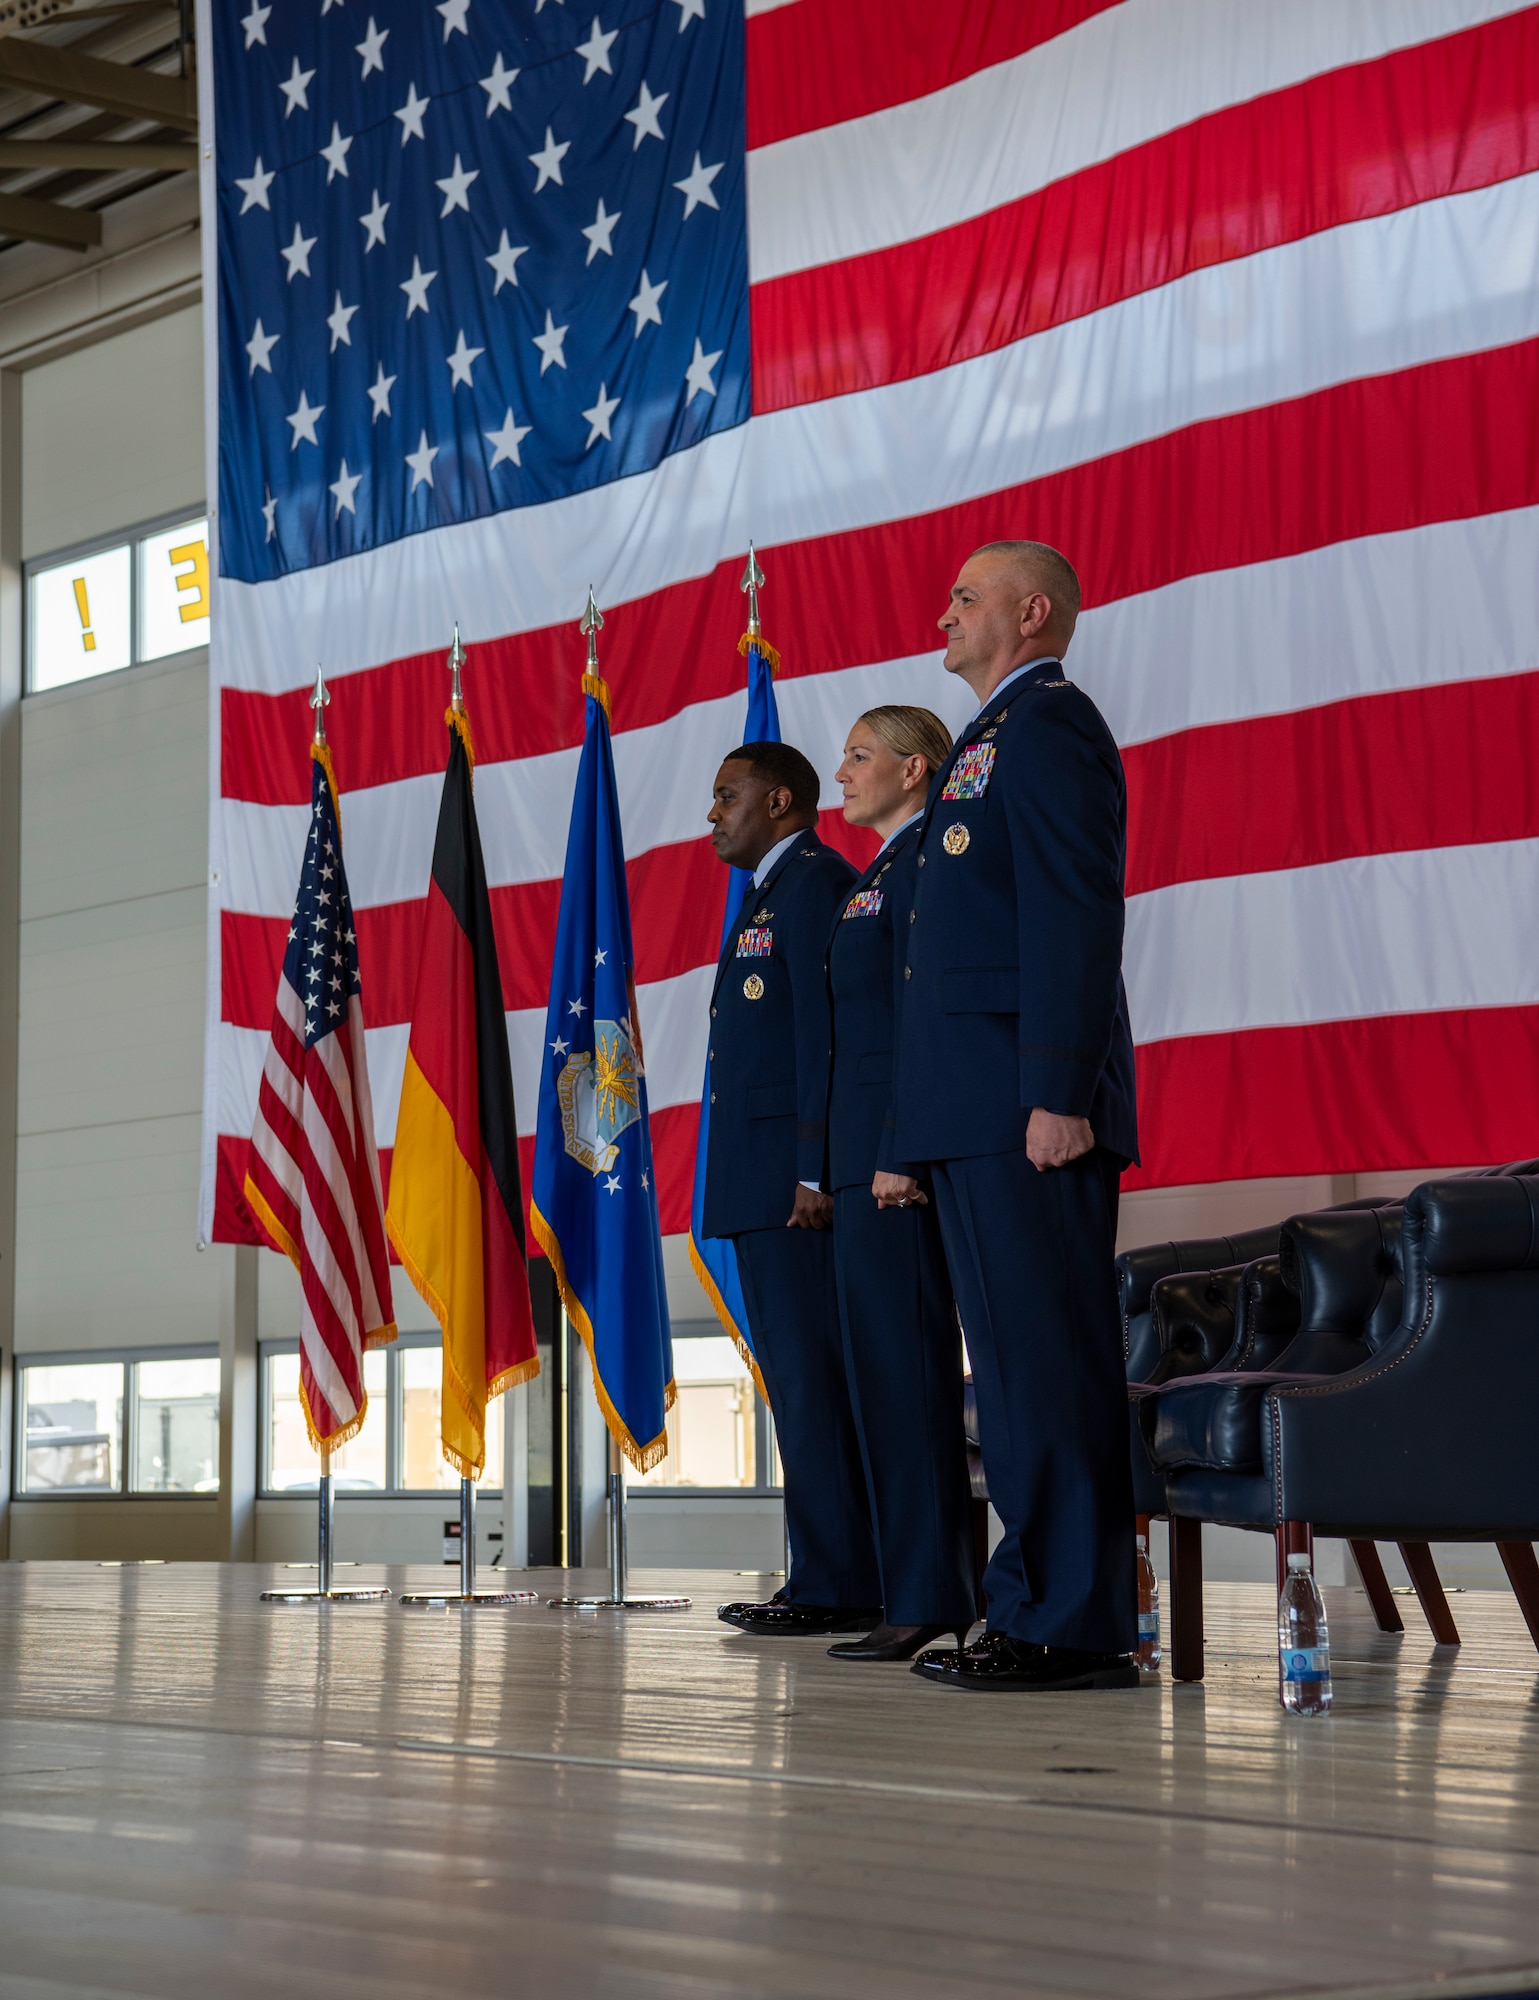 U.S. Air Force Brig. Gen. Otis C. Jones, left, 86th Airlift Wing commander, stands with Col. Amy M. Glisson, middle, outgoing 86th Mission Support Group commander, and Col. James A. Cunningham, right, incoming 86th MSG commander, at Ramstein Air Base, Germany, June 9, 2023